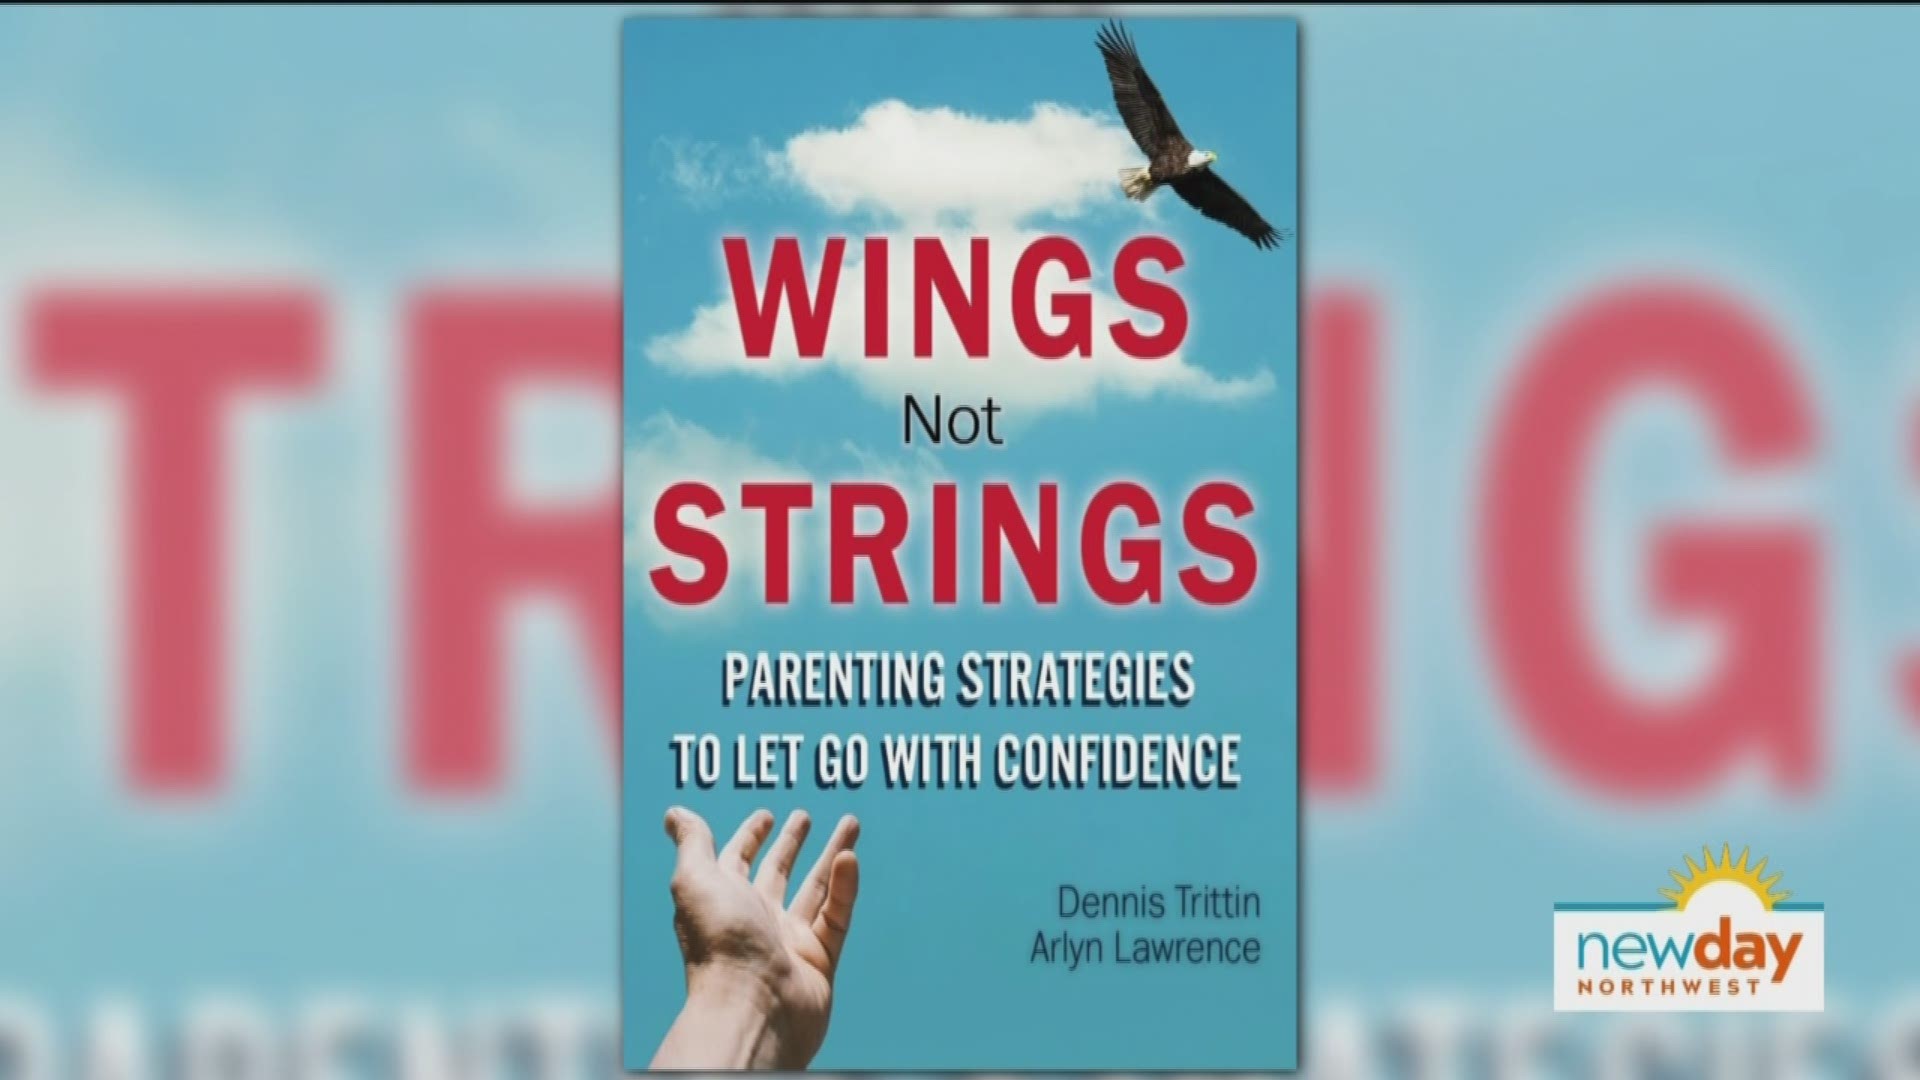 Giving Your Kids Wings, Not Strings: Parenting strategies to help us let go
A new book offers practical parenting advice to raise confident and responsible humans.